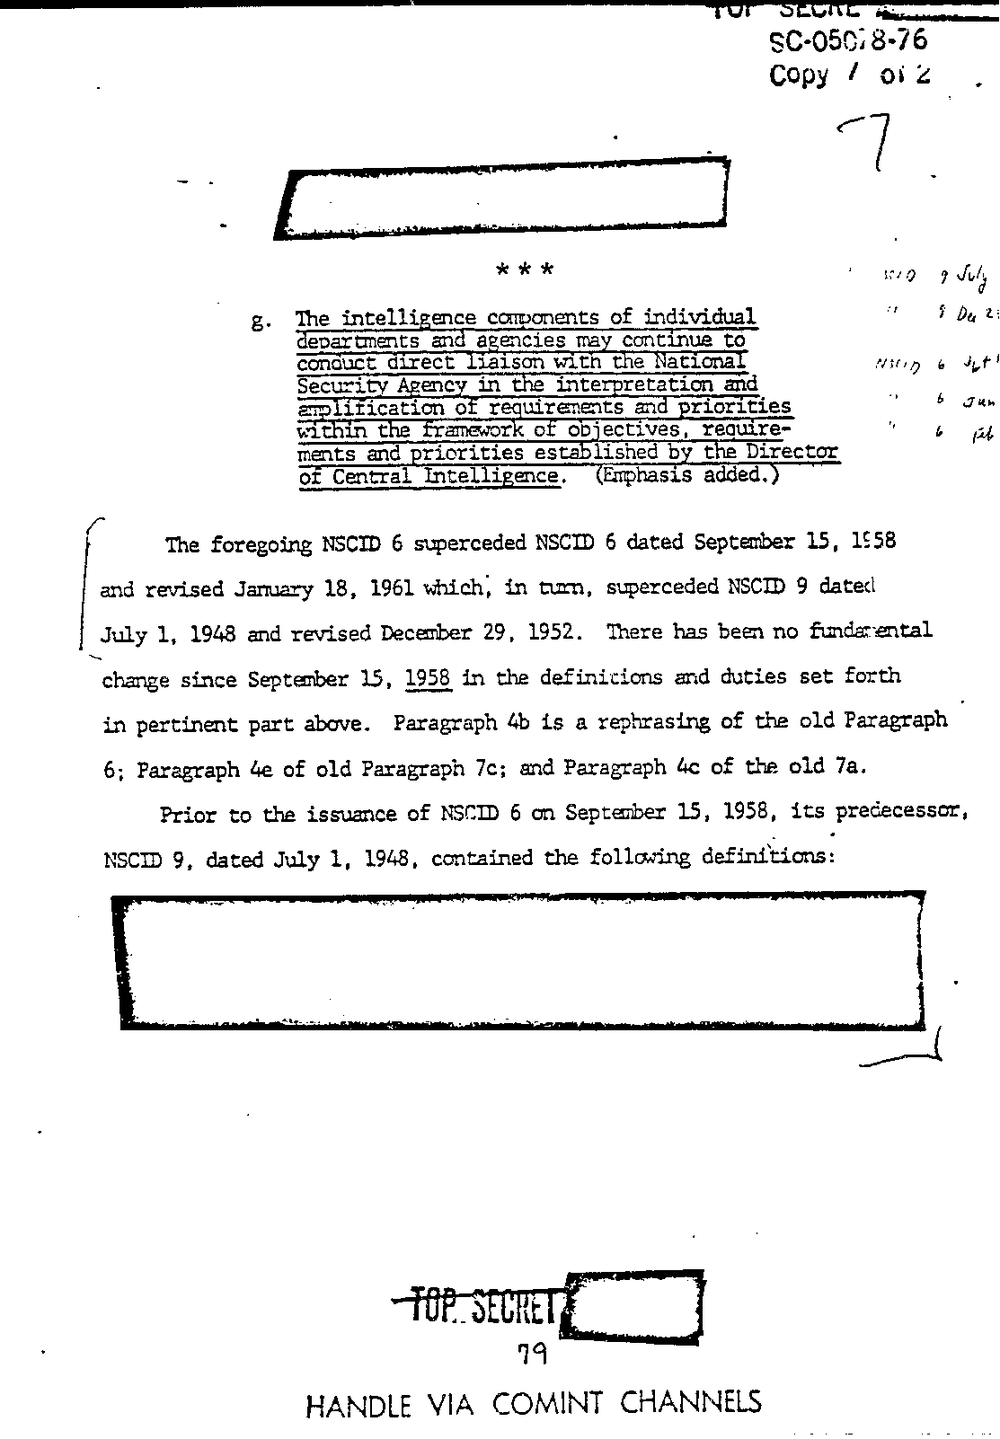 Page 87 from Report on Inquiry Into CIA Related Electronic Surveillance Activities